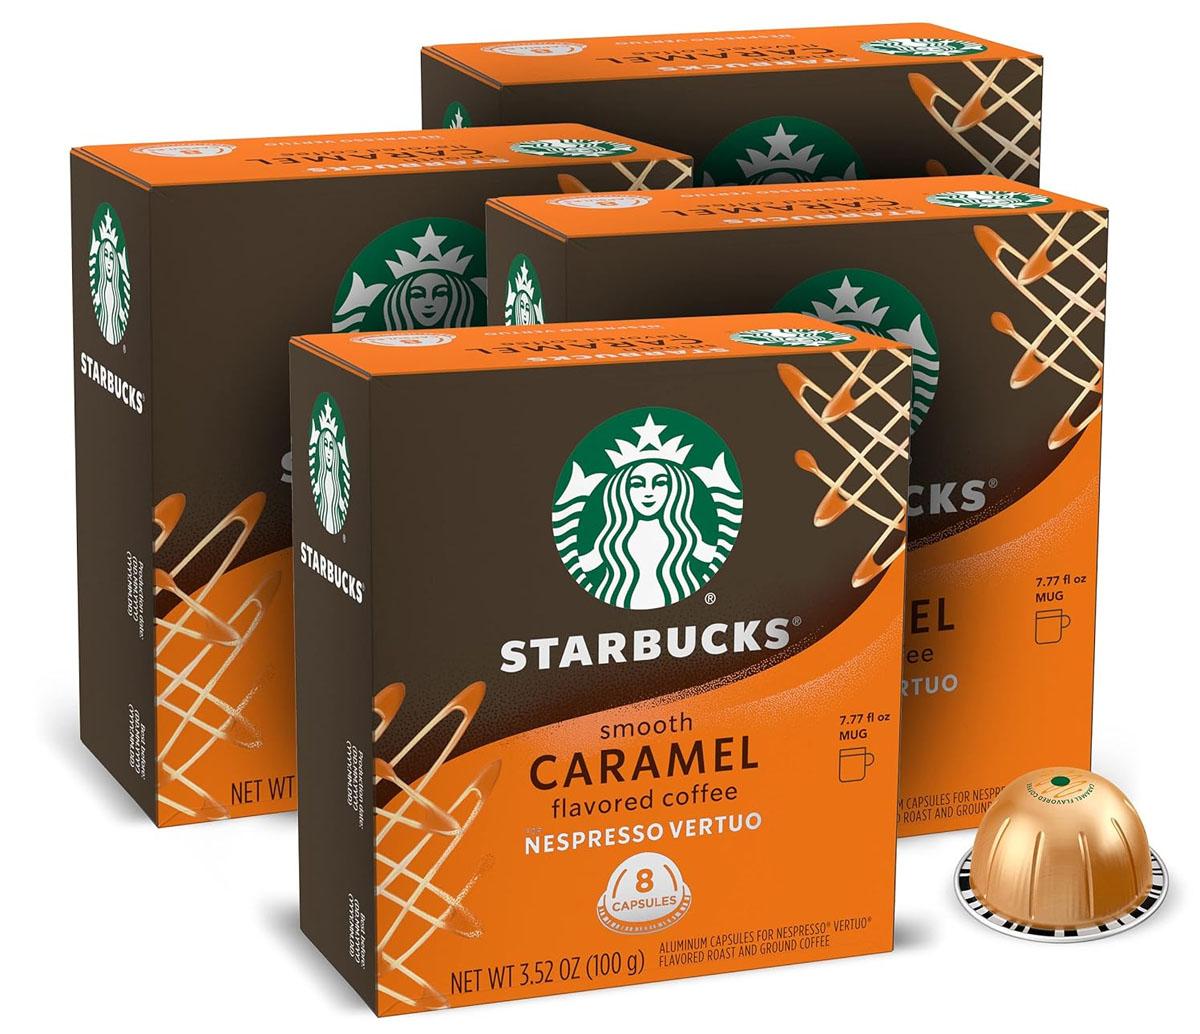 Nespresso Vertuo Starbucks Caramel Flavored Coffee Pods 32 Pack for $28.80